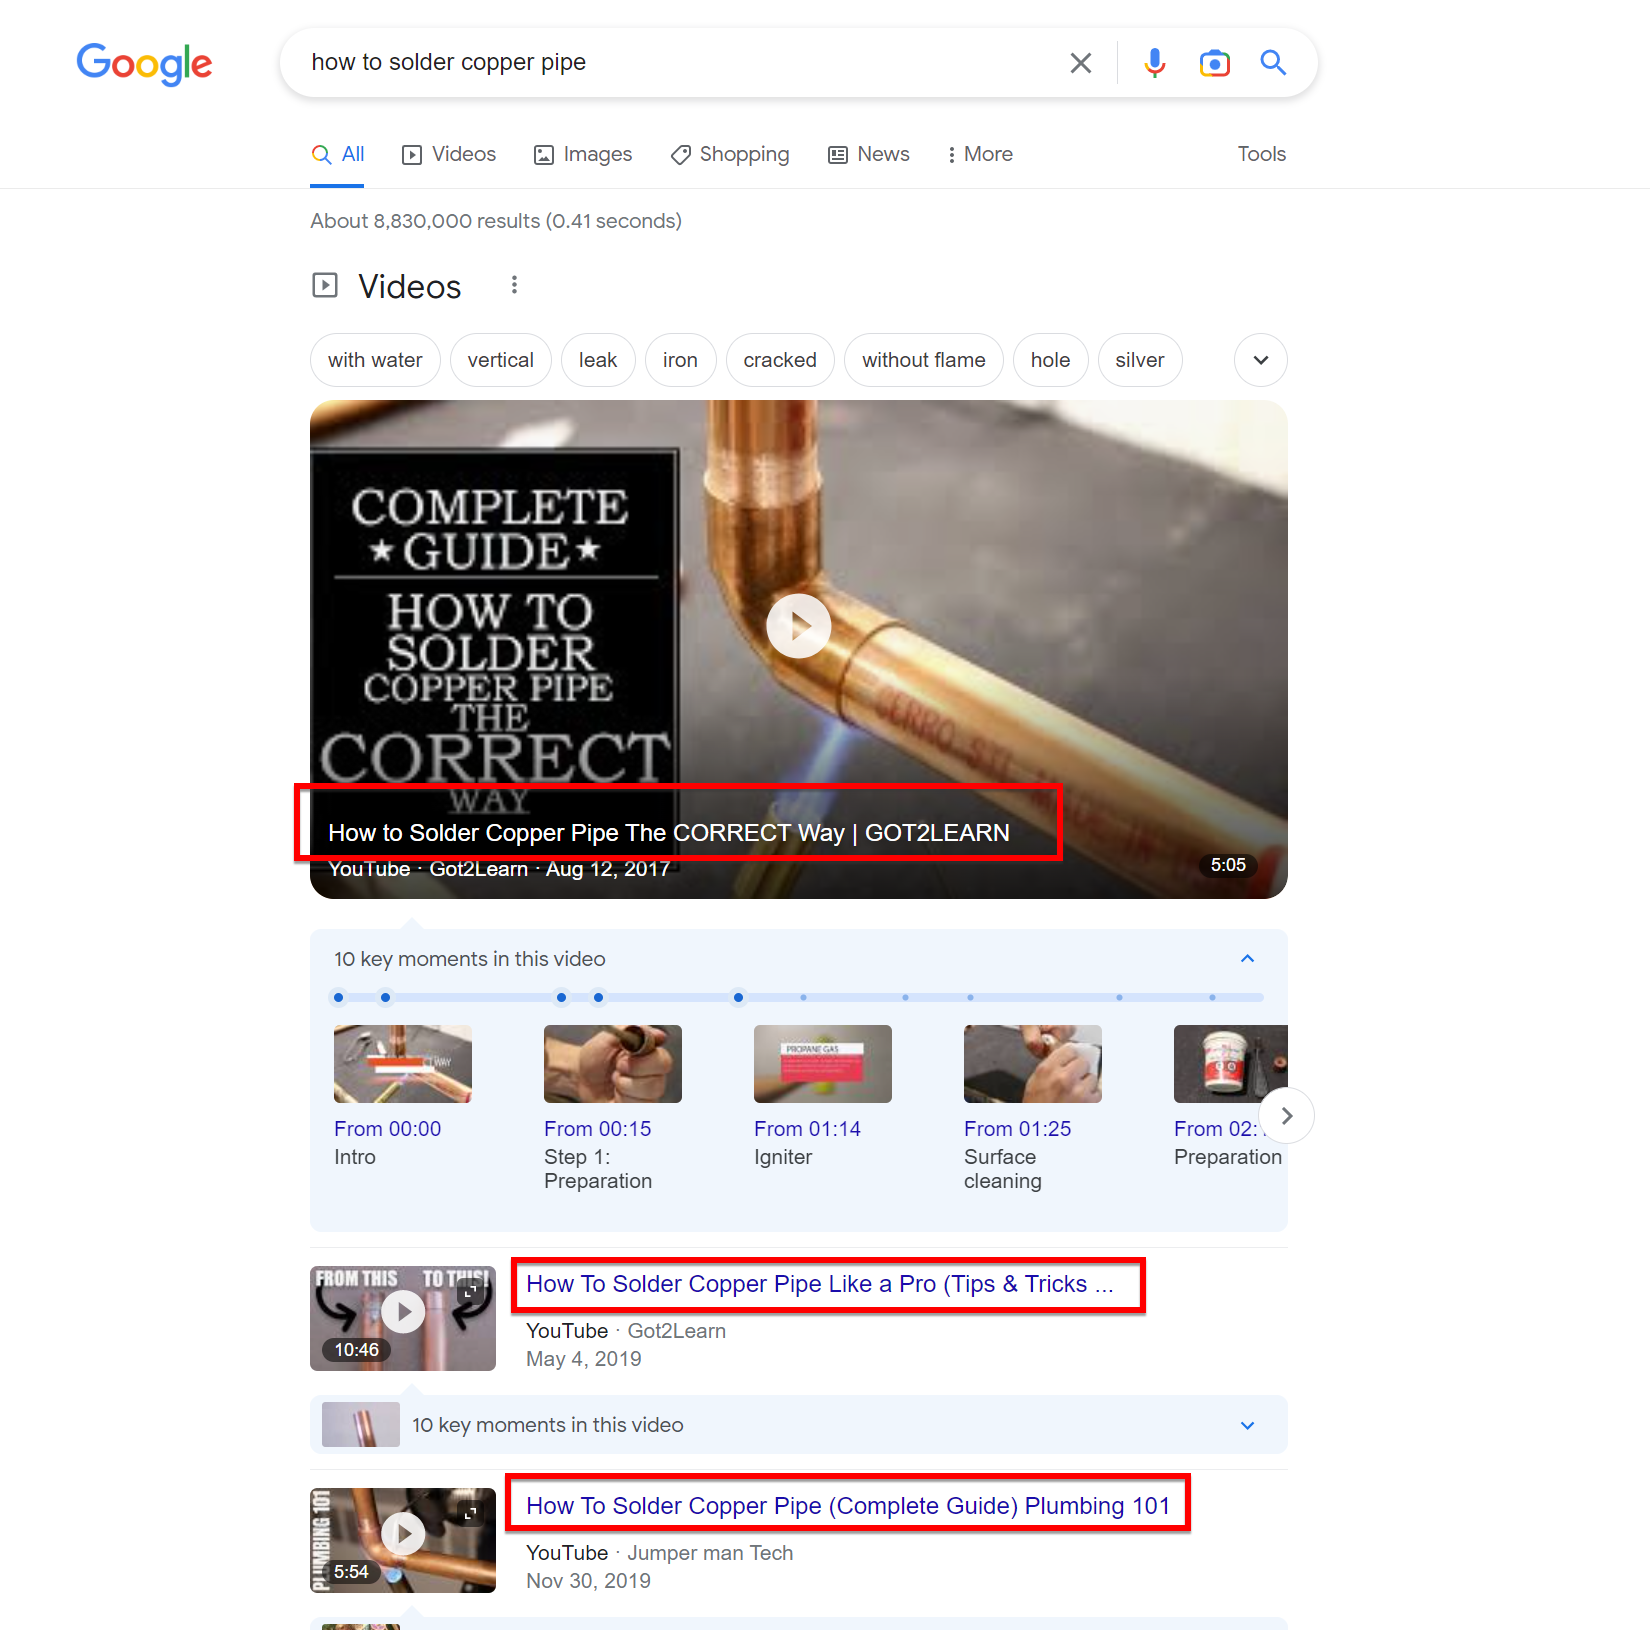 How-to focused video titles in the Google search results